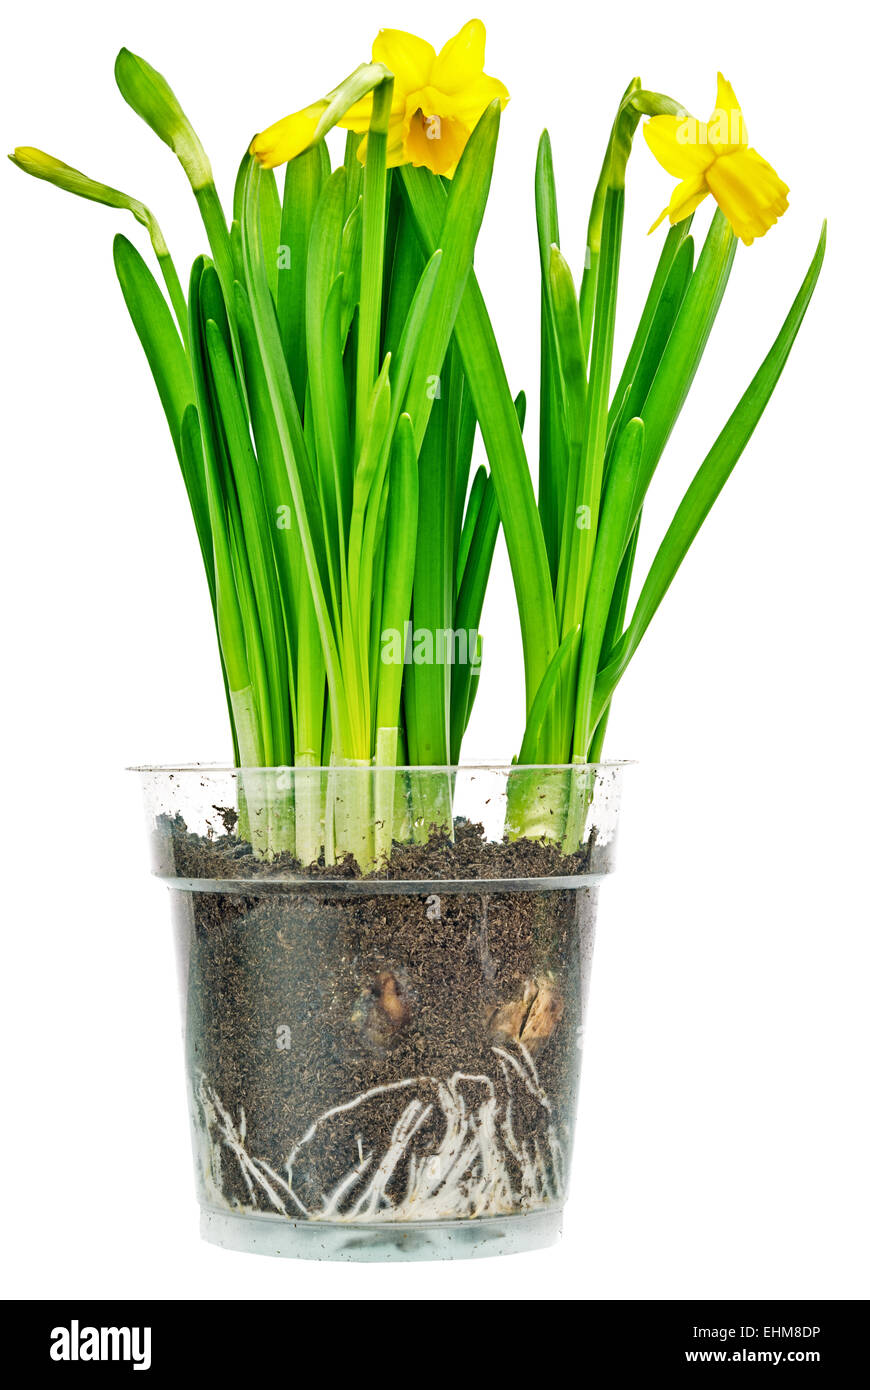 Daffodils in small planter. Clipping Path Included. Stock Photo